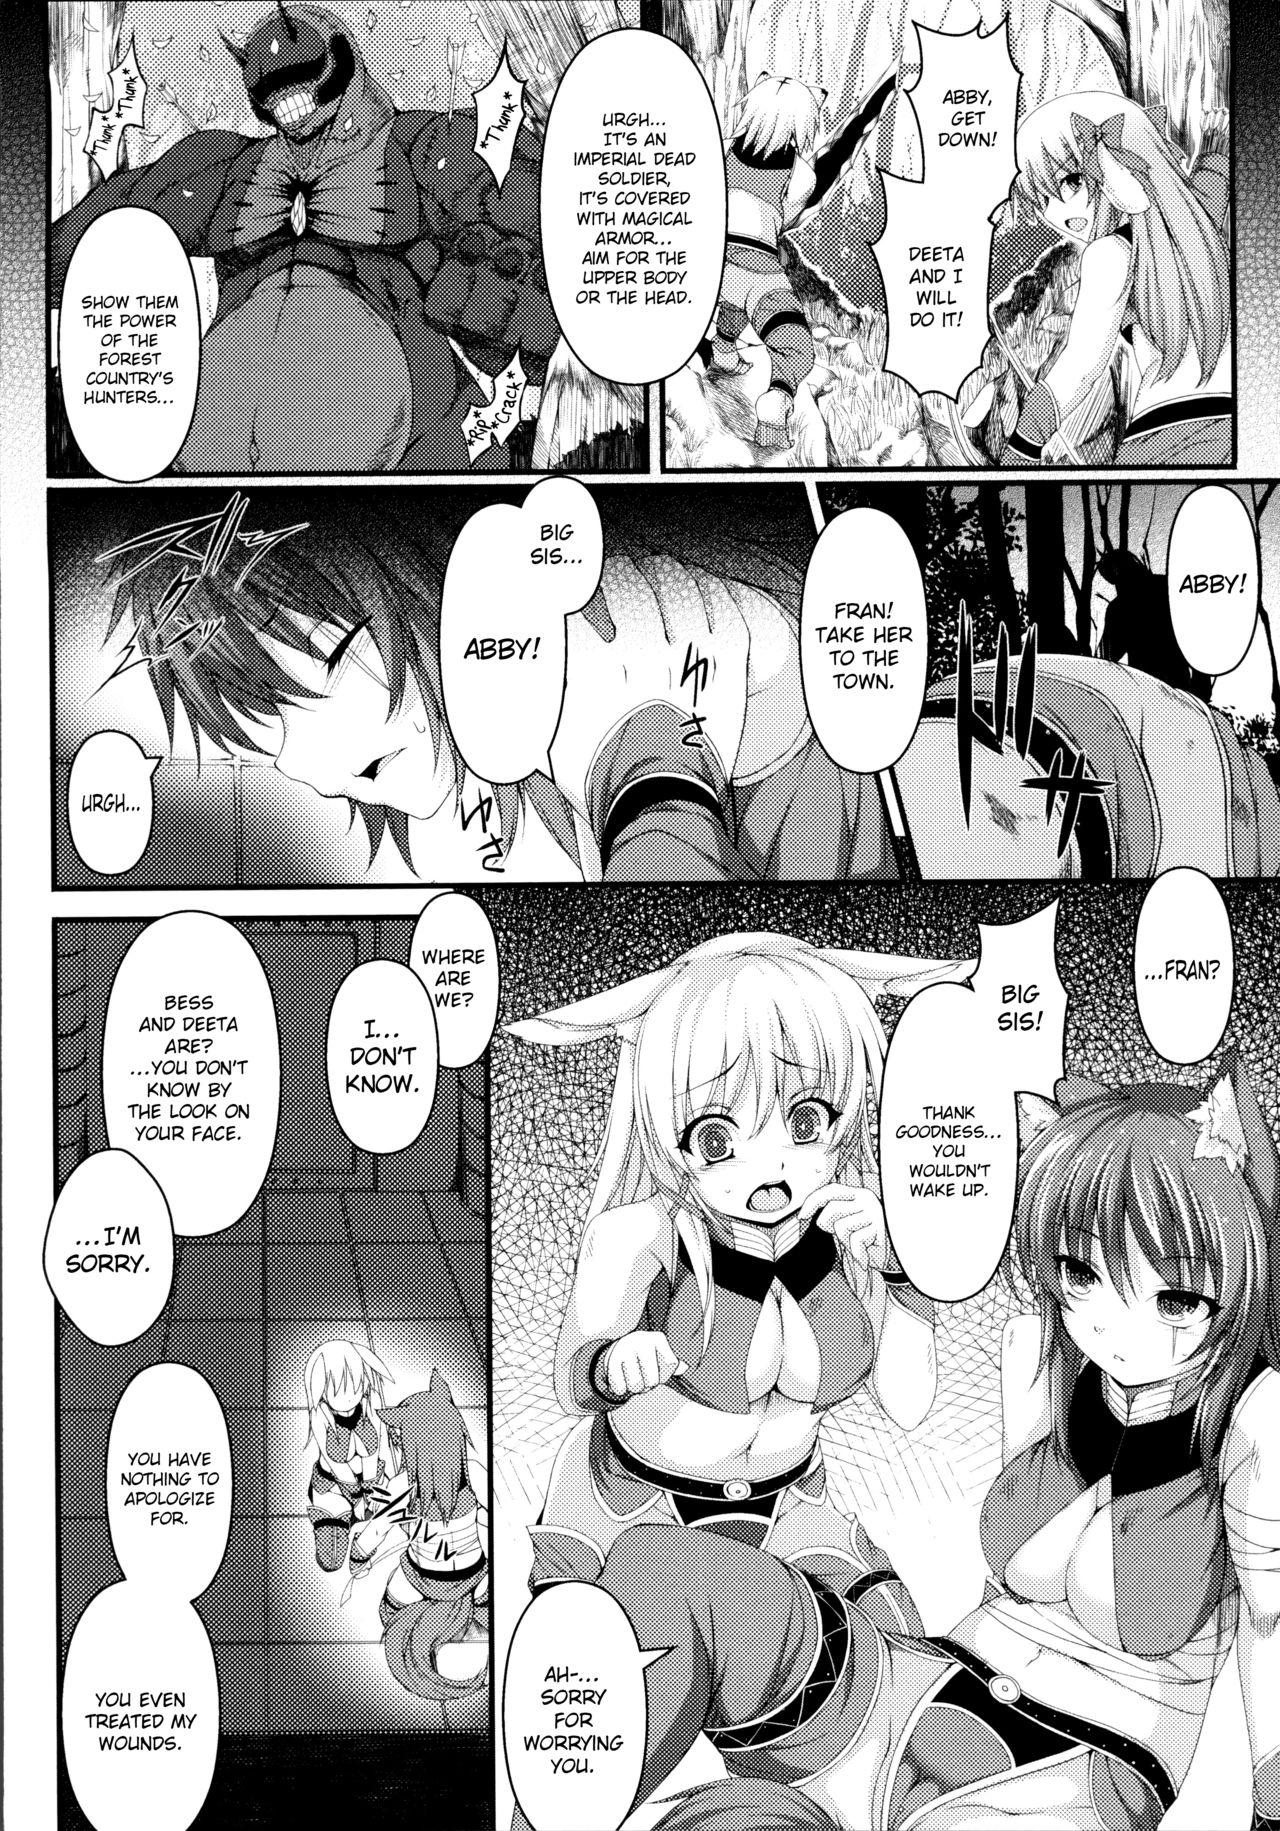 Trap Cradle to Grave Girl On Girl - Page 2